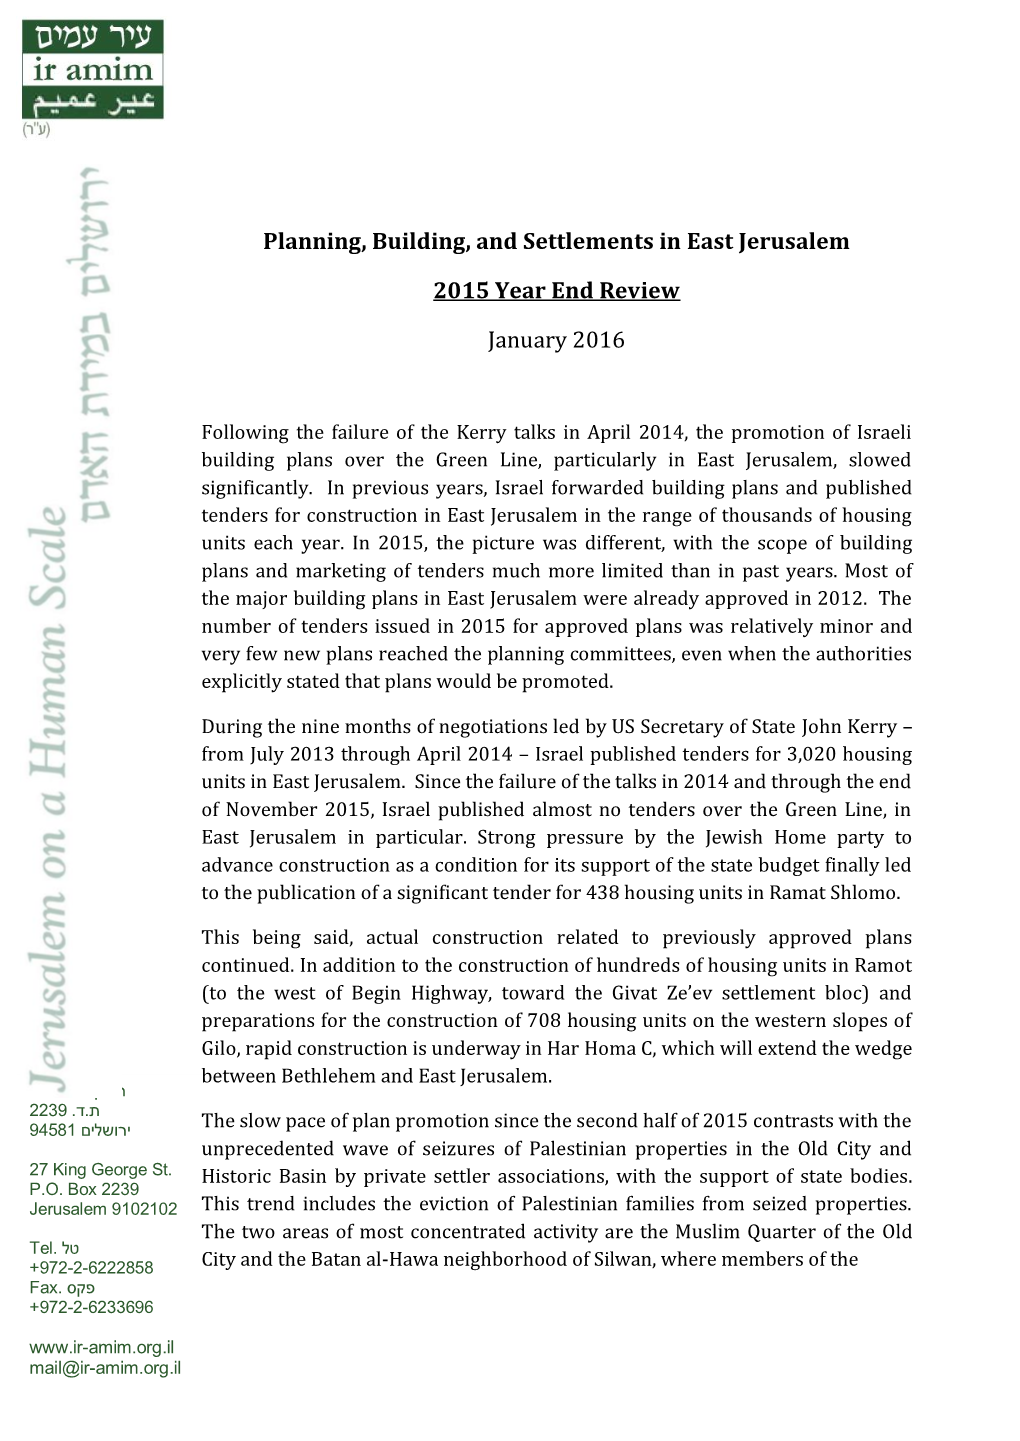 Planning, Building, and Settlements in East Jerusalem 2015 Year End Review January 2016